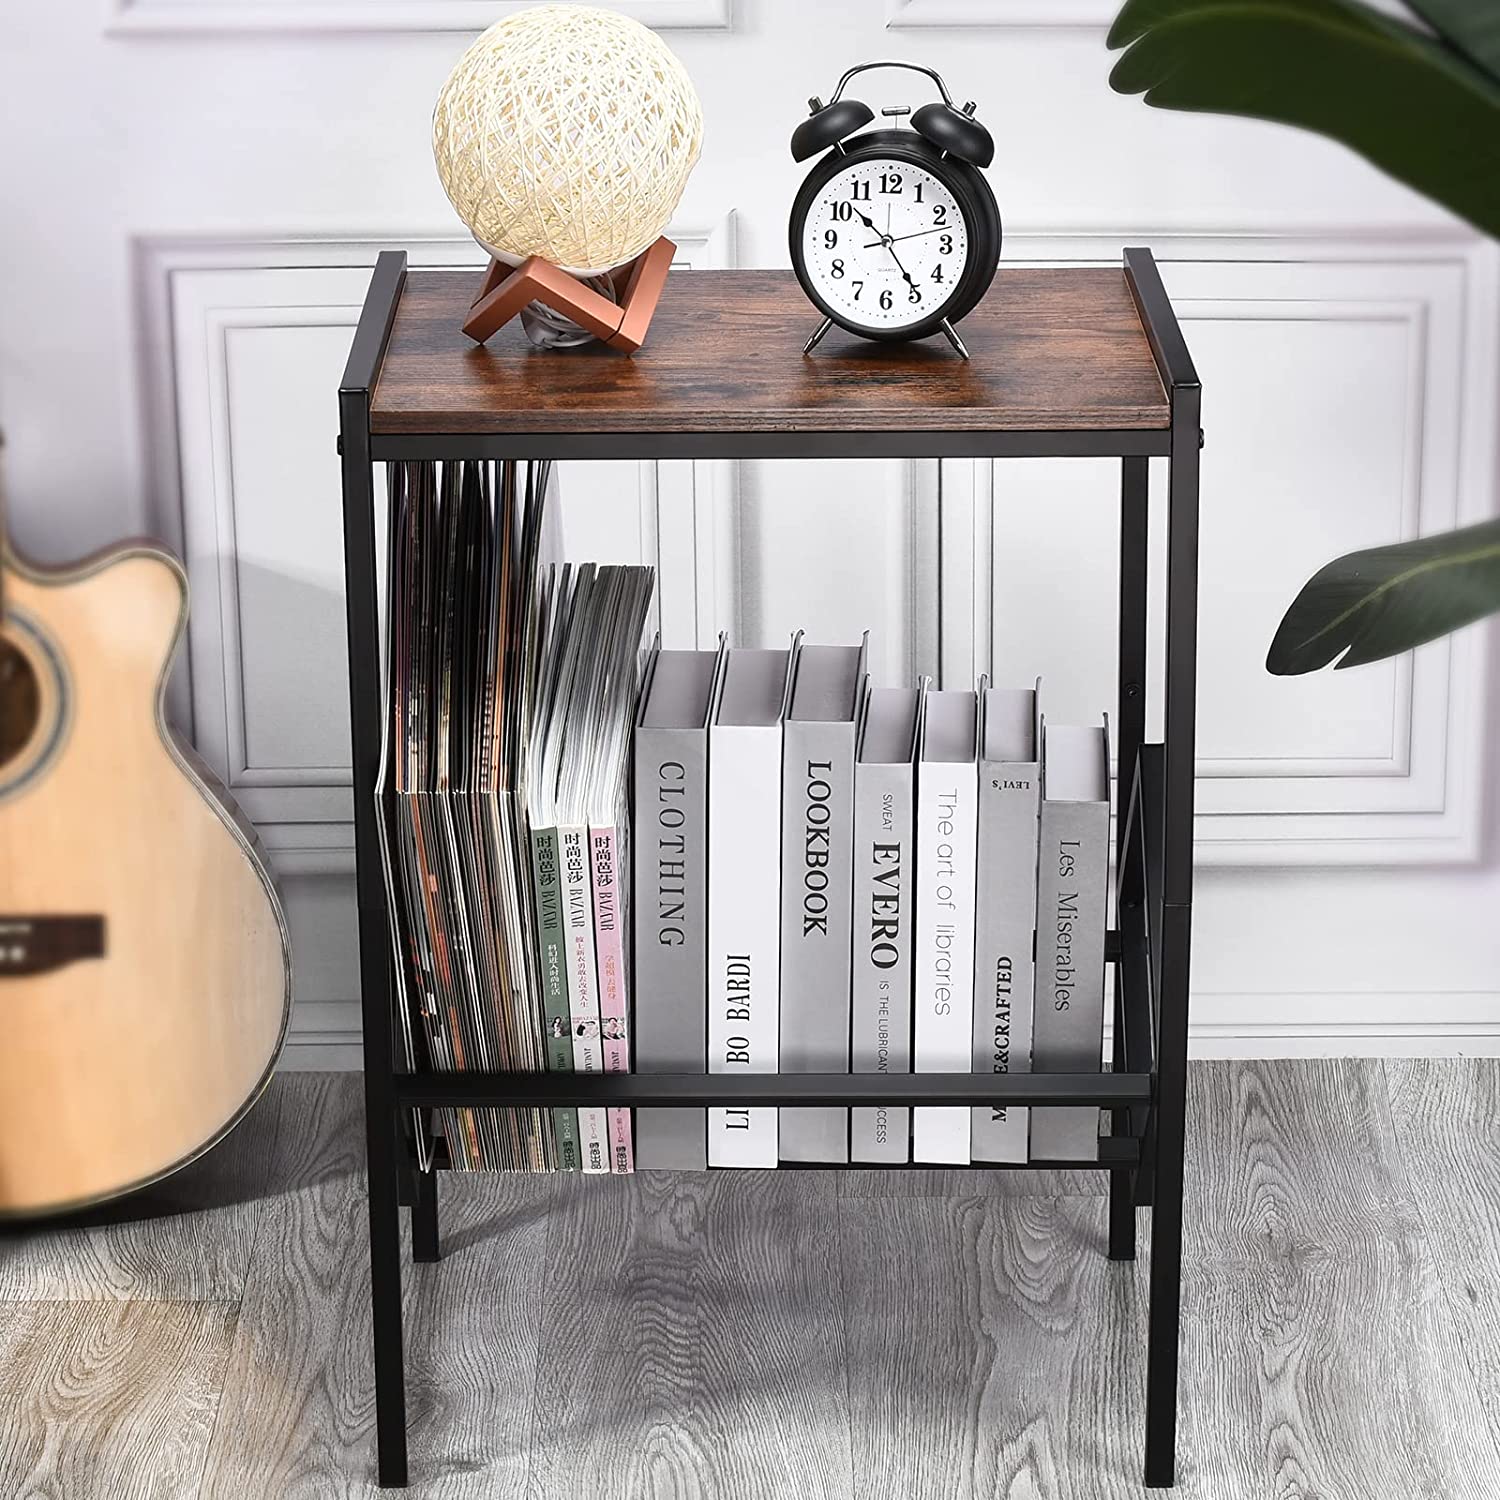 DACK Record Player Stand with Storage Up to 80 Albums,Turntable Stand with Matte Black Metal Legs, Record Player Table for Living Room Bedroom Office